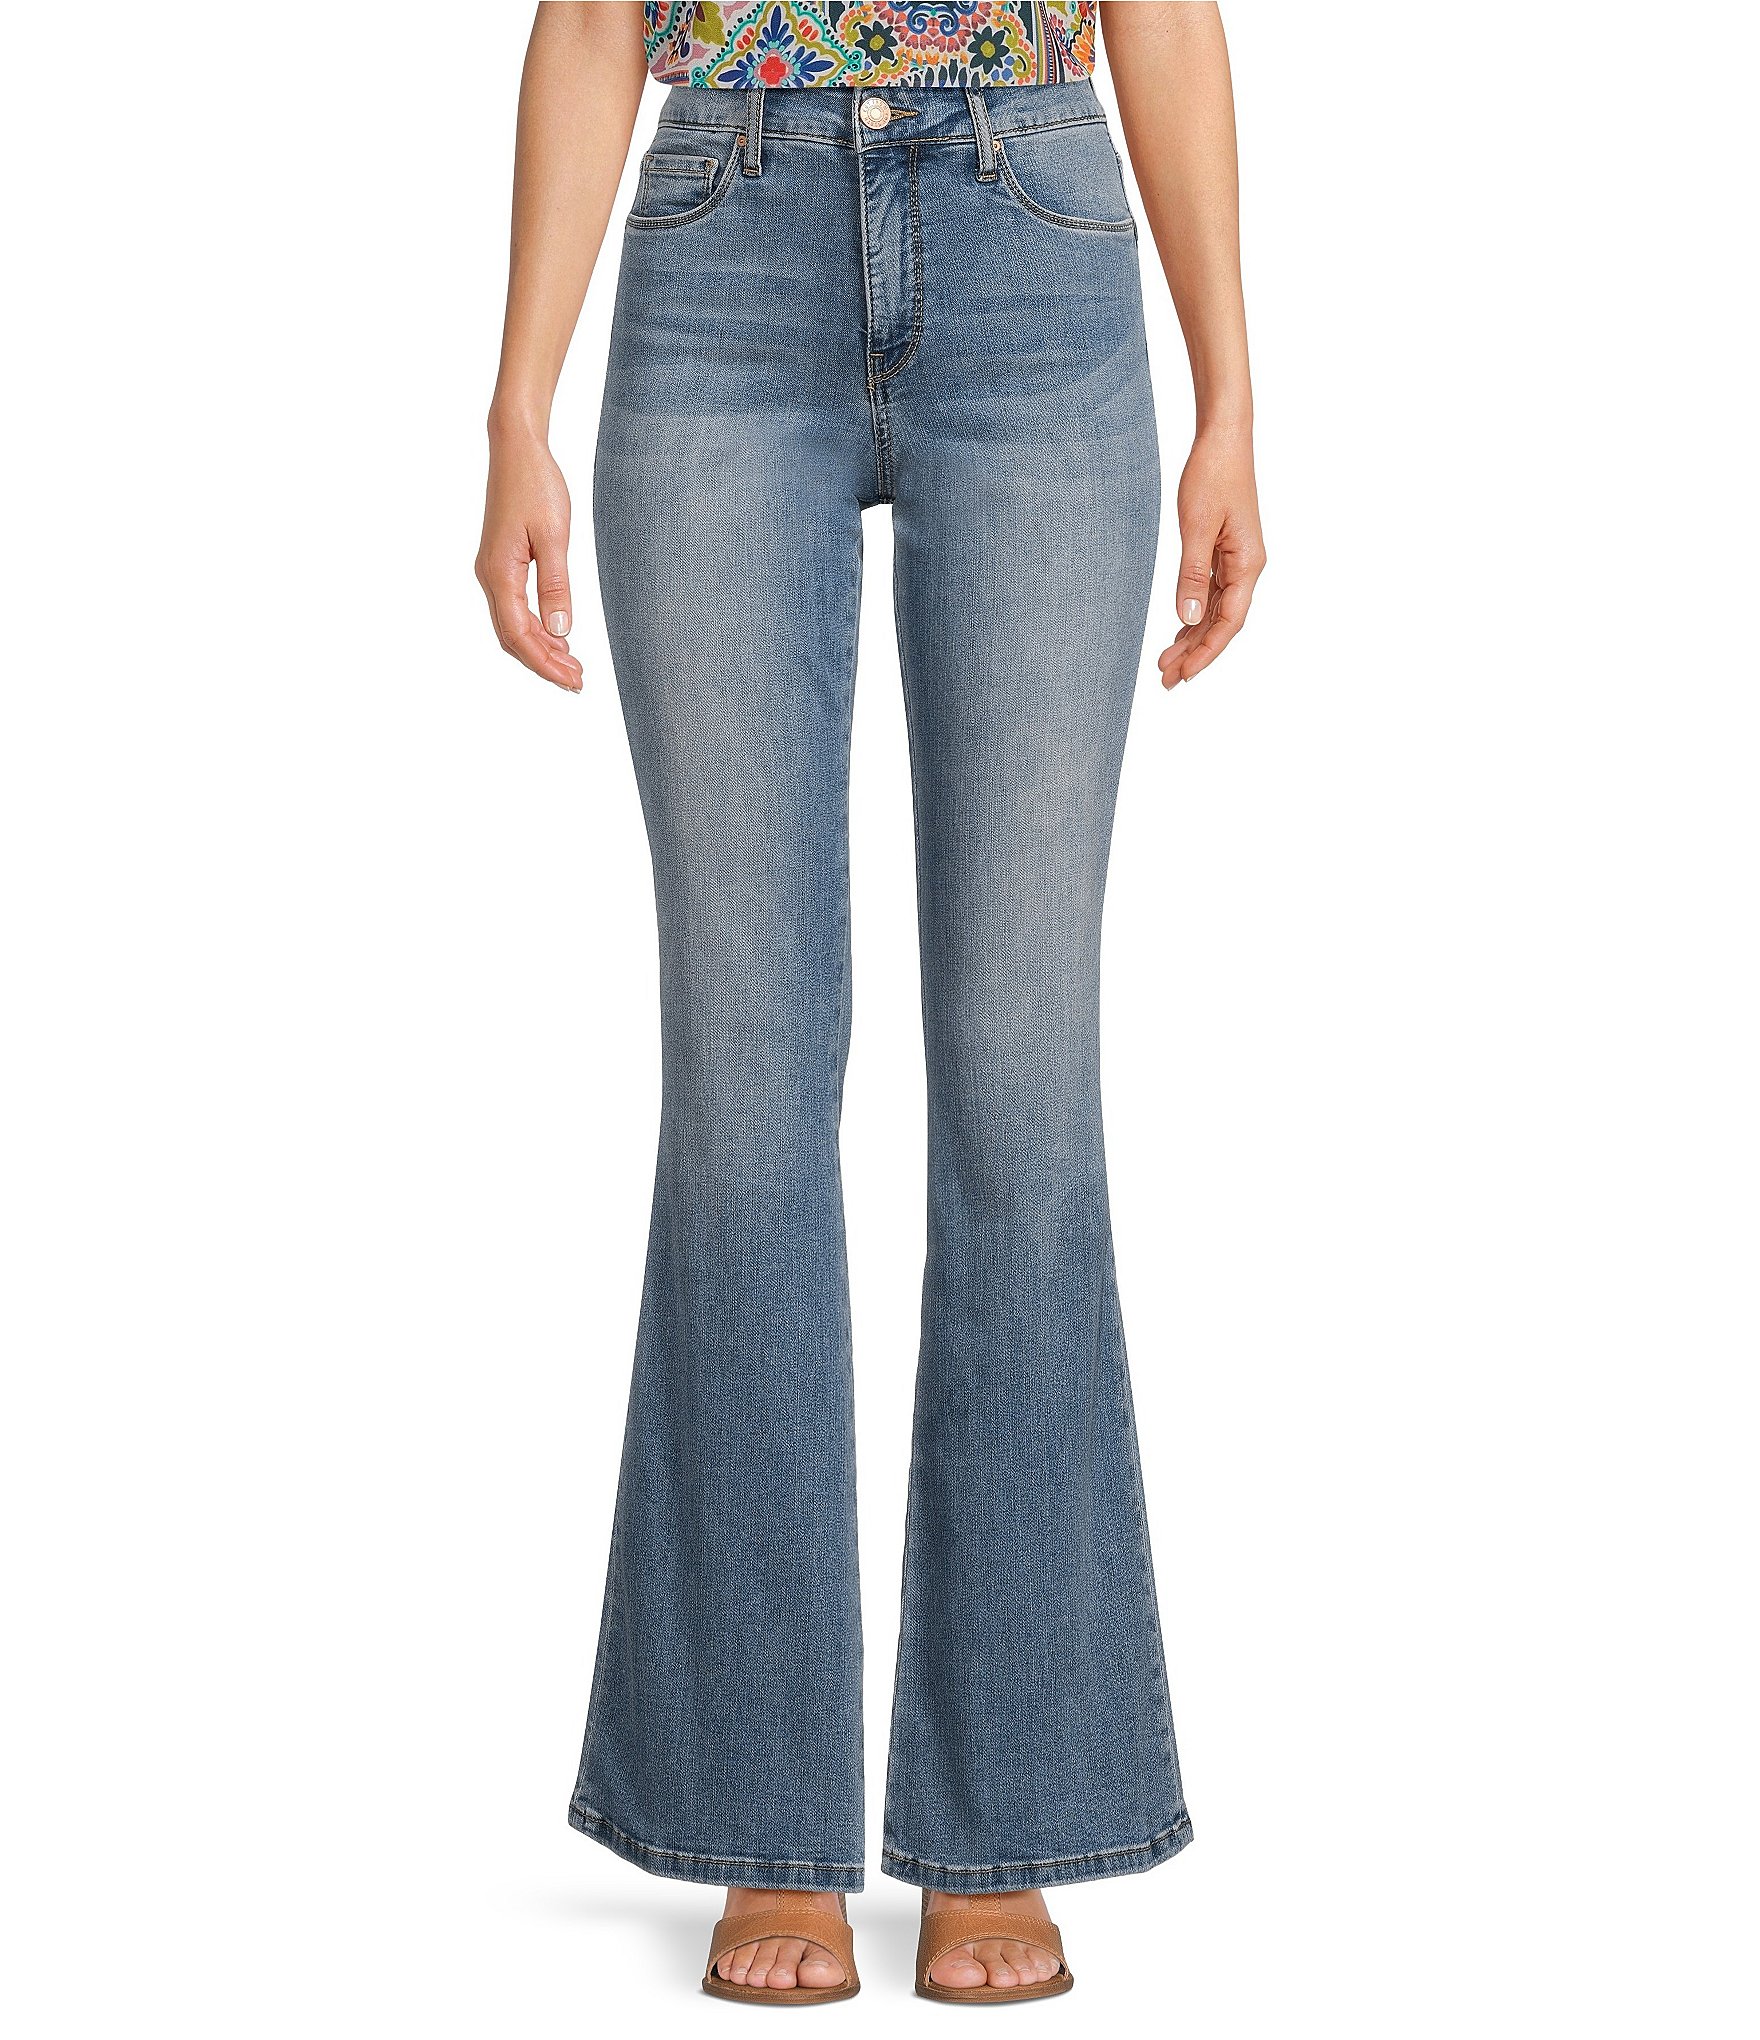 KUT from the Kloth Ana Fab Ab High Rise Flare Leg Jeans